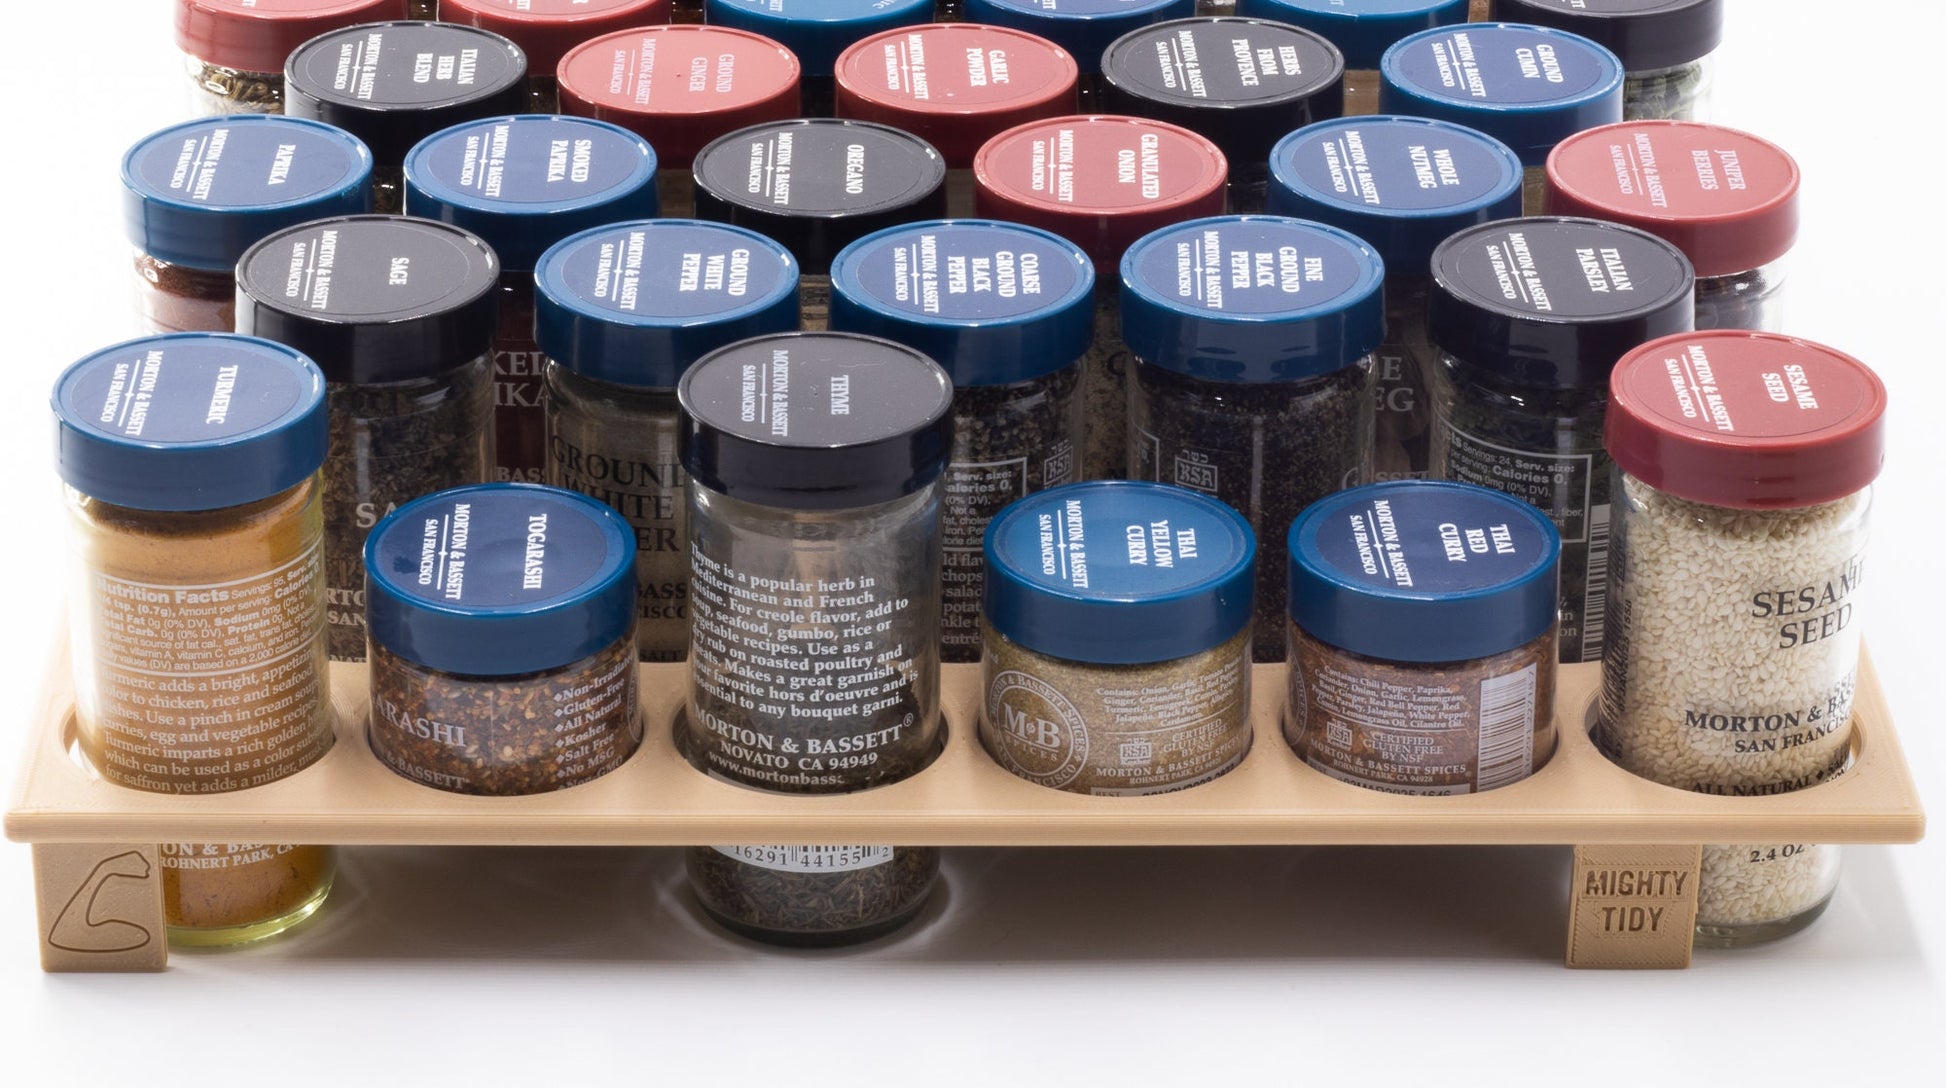 Spice Drawer Organizer for Vertical/Standing Jars – Mighty Tidy Organizers